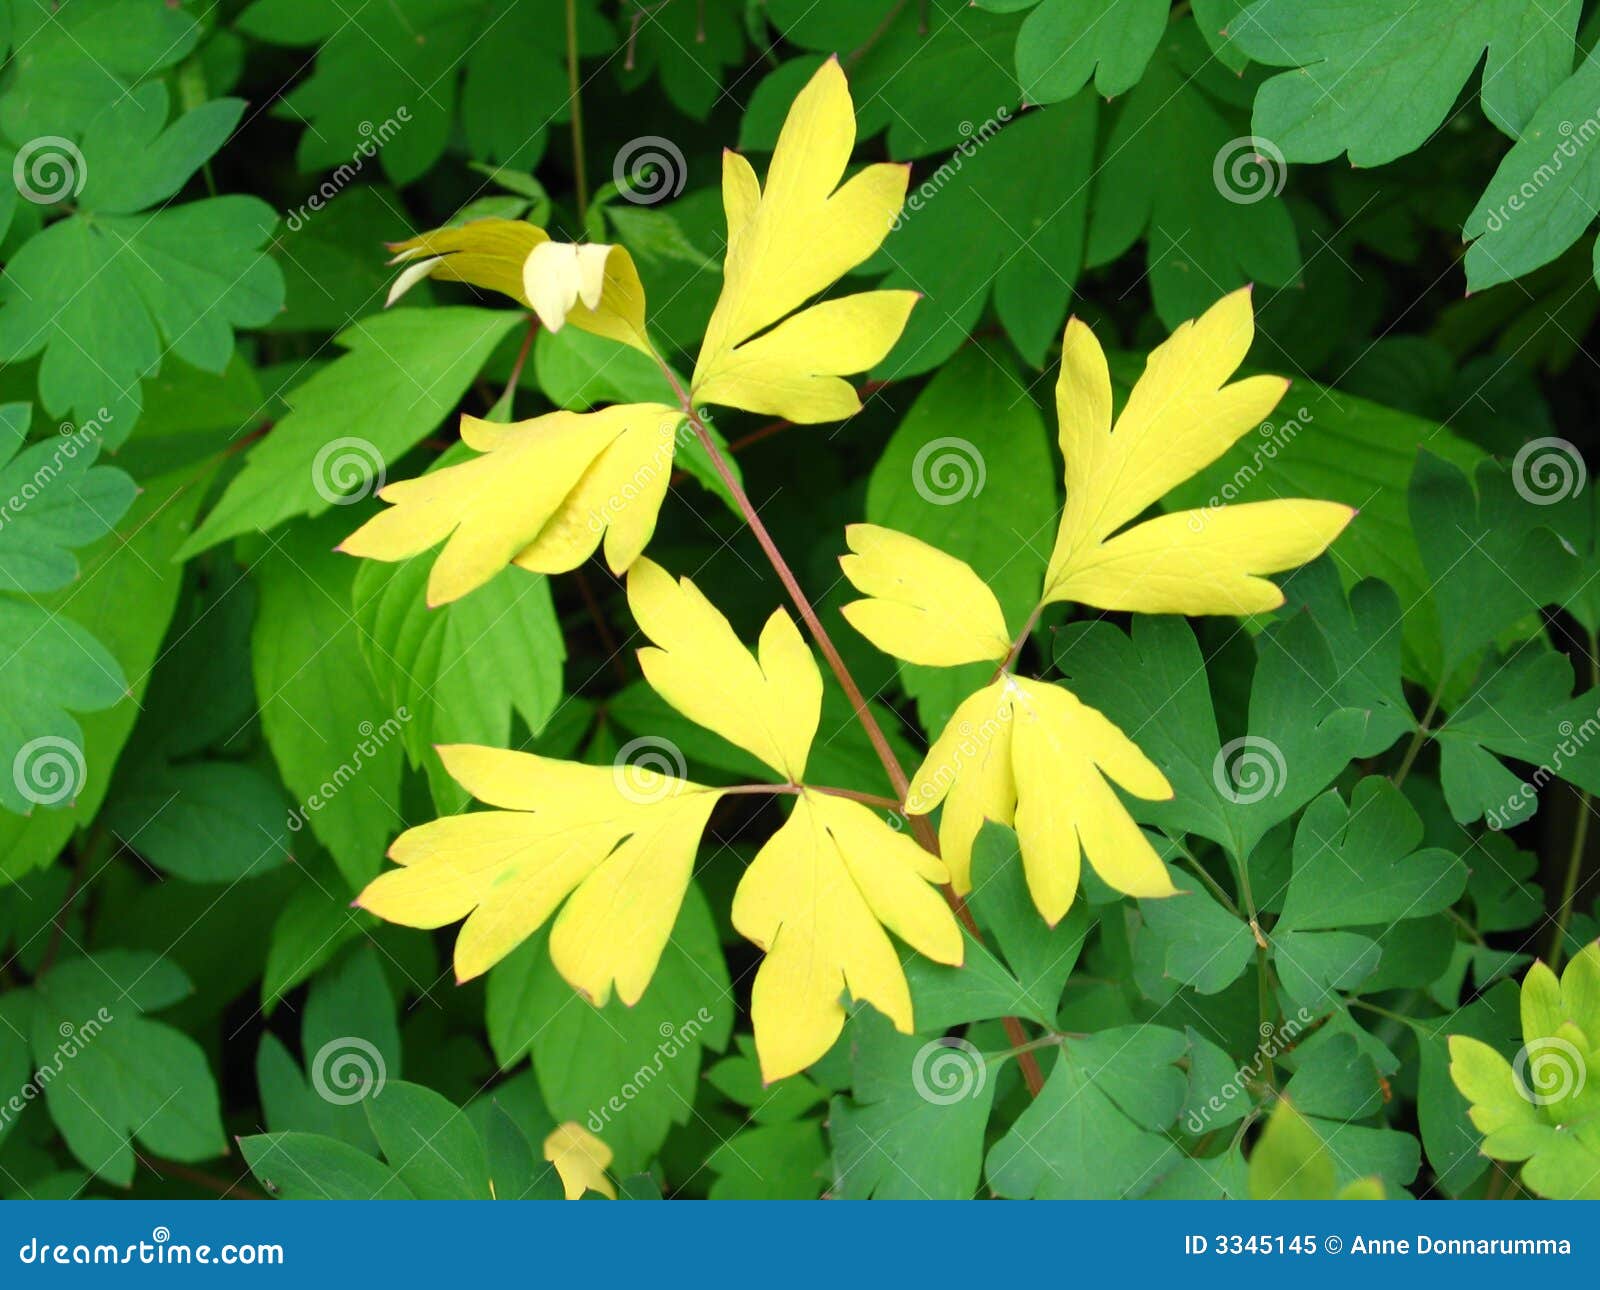 contrasting yellow leaves on green